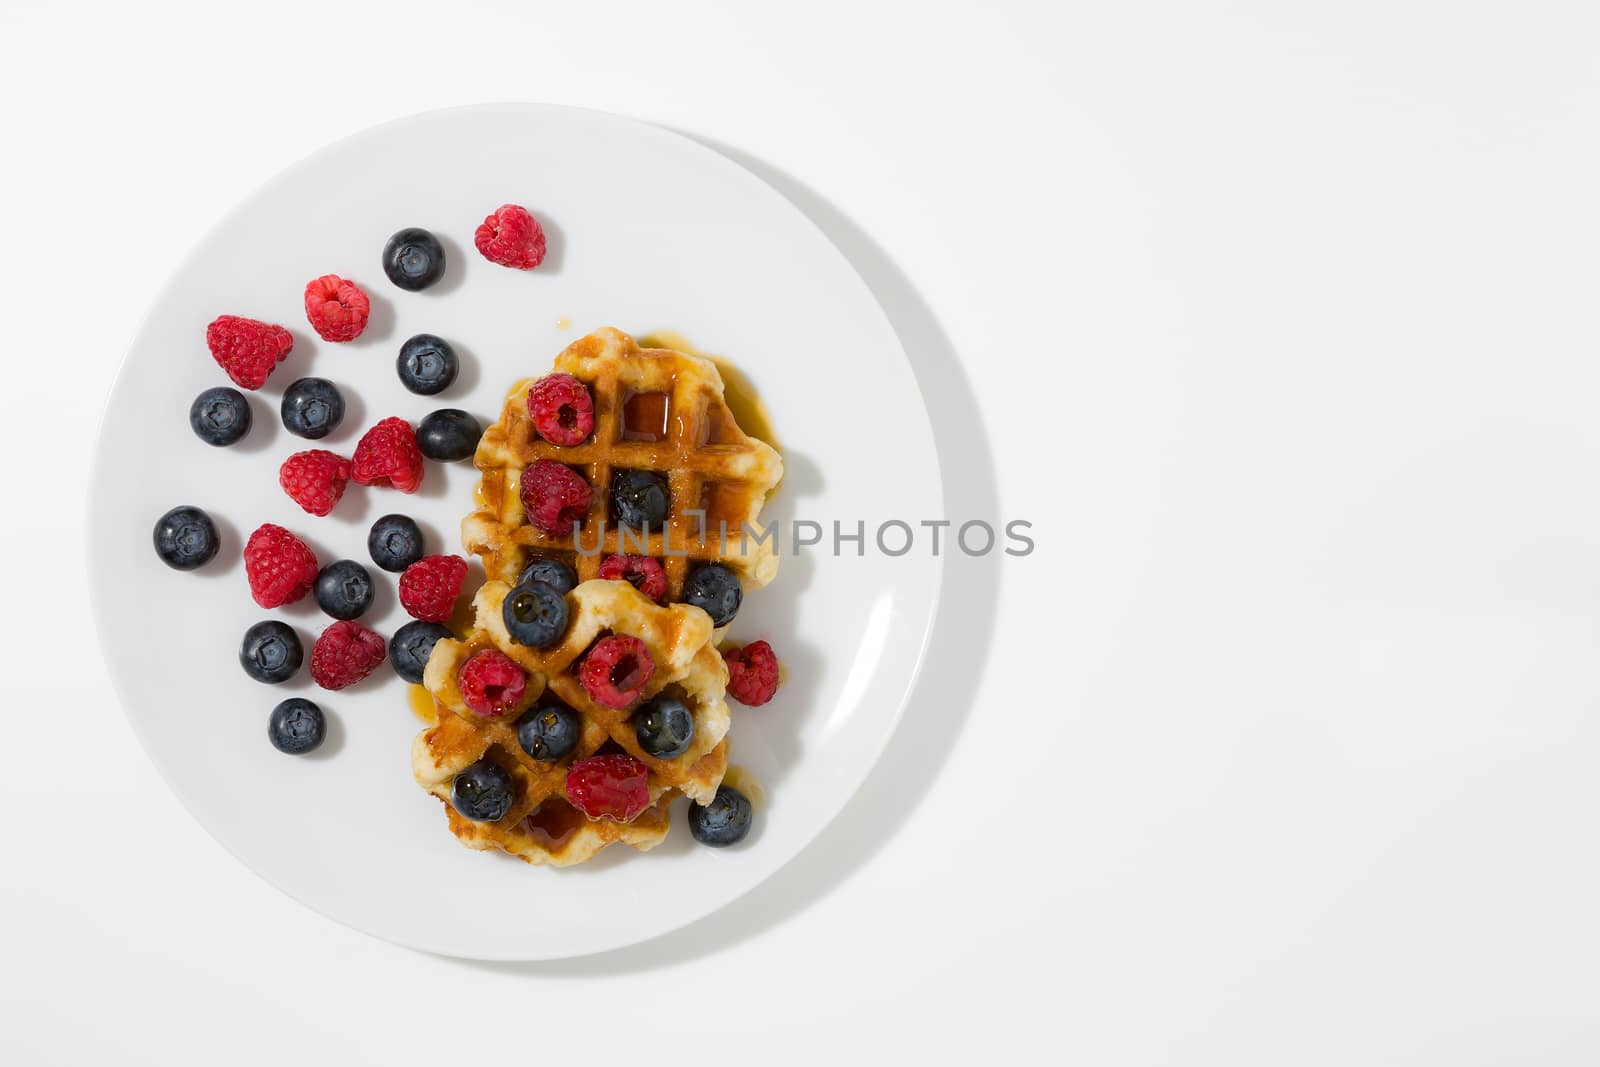 Waffles with berries and maple syrup seen from above